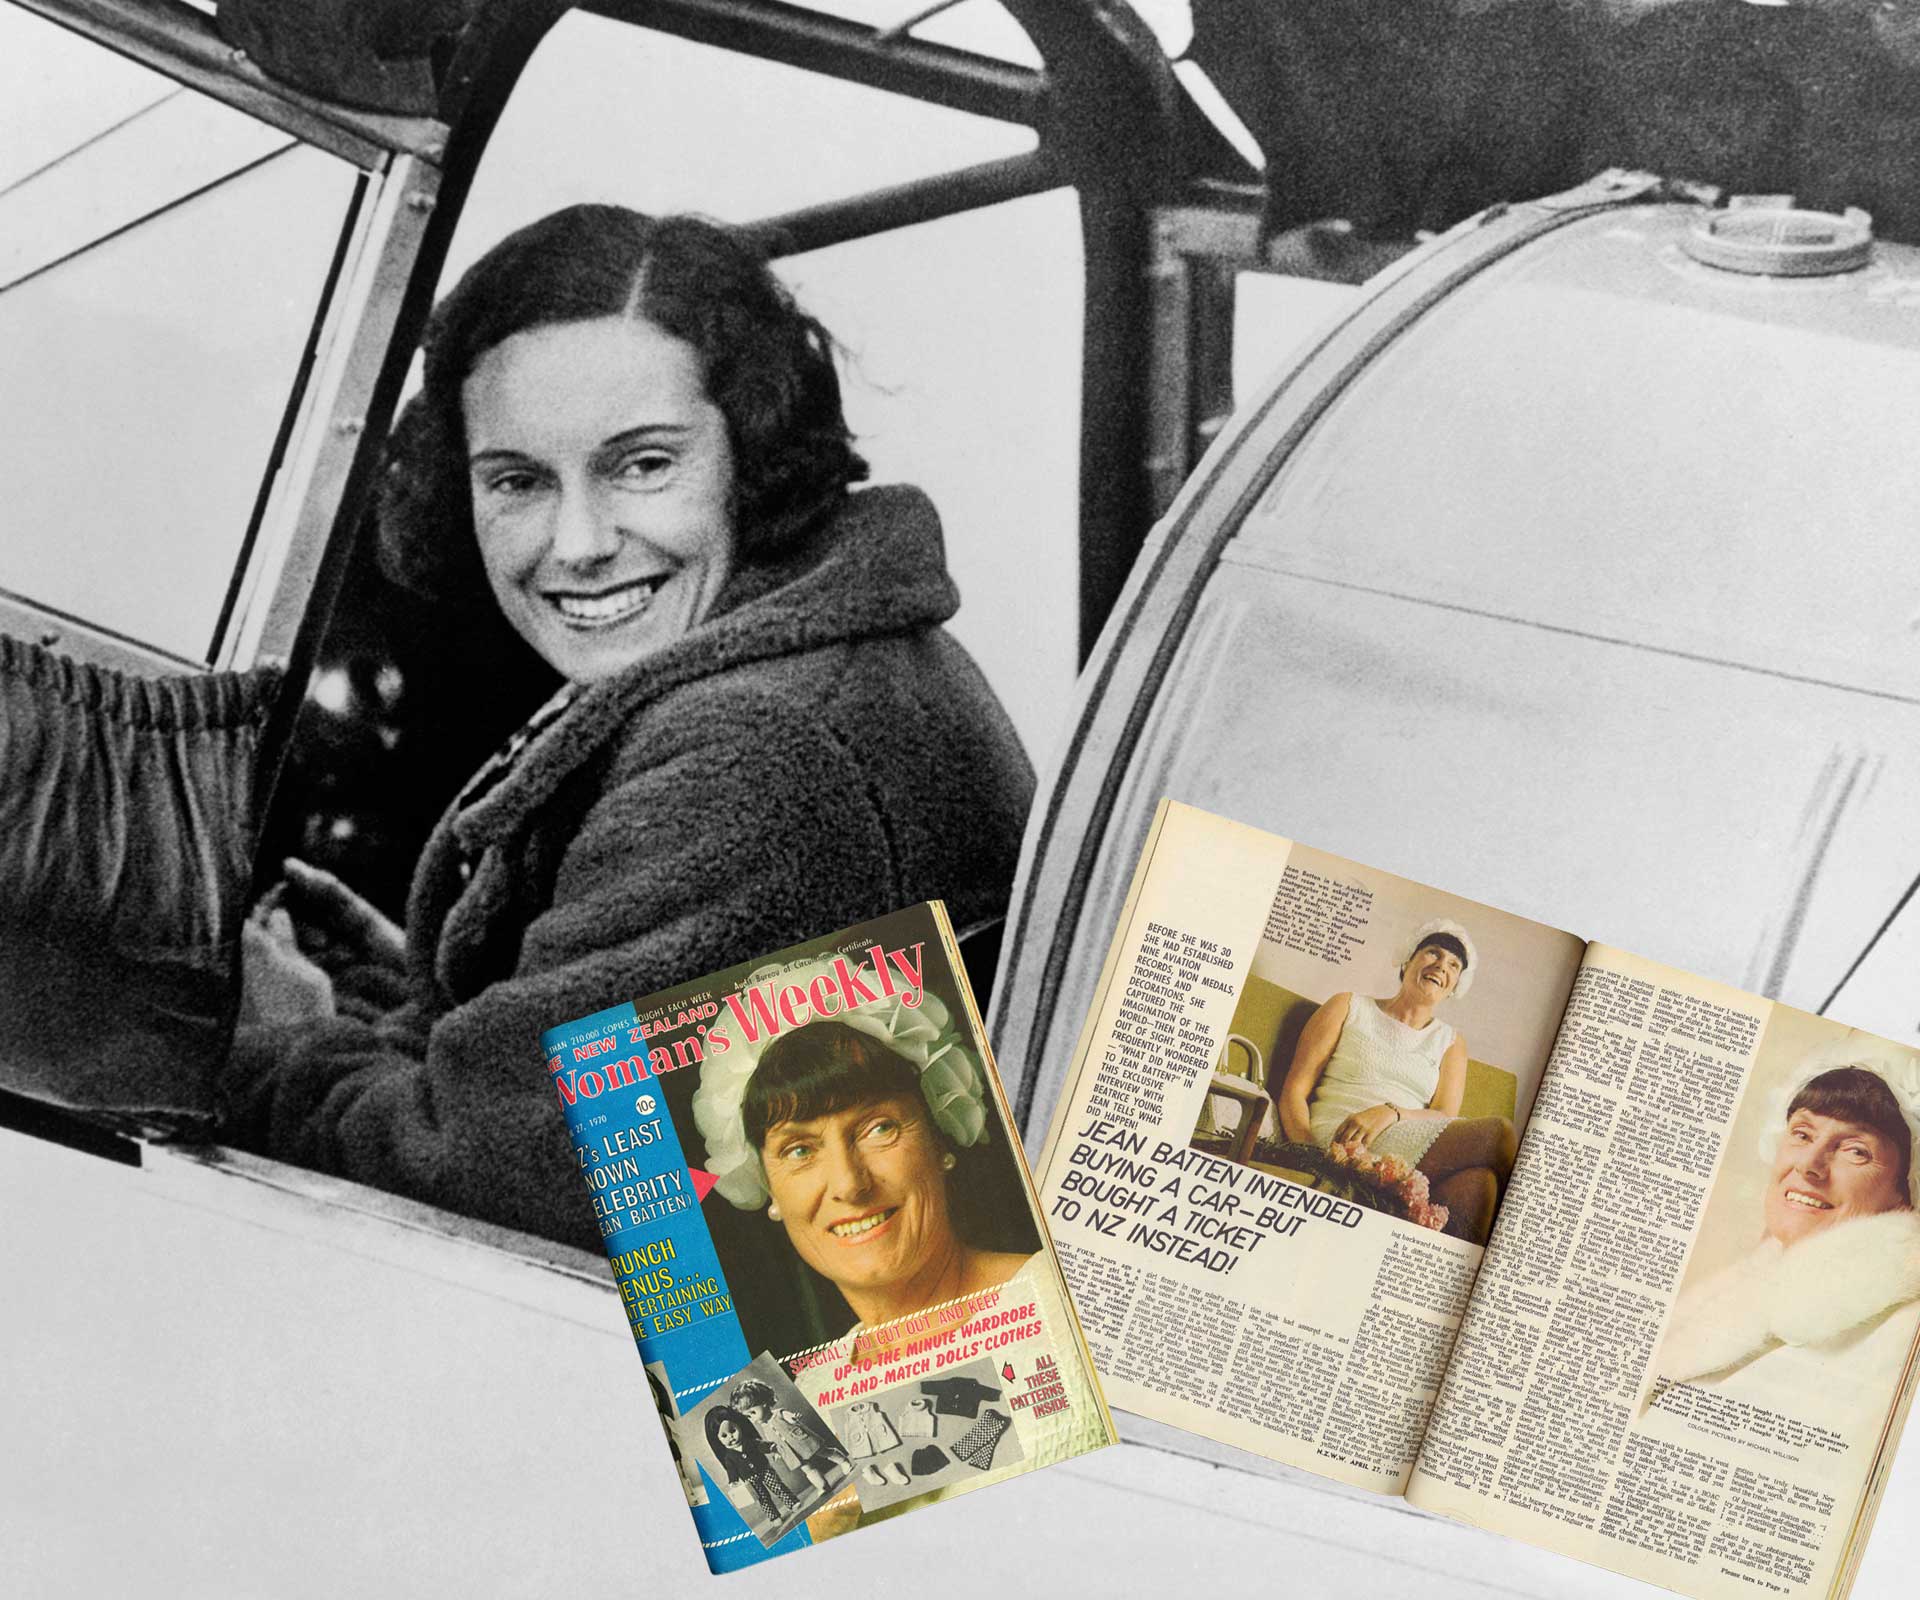 From the archives: Kiwi aviation pioneer Jean Batten opens up about fame